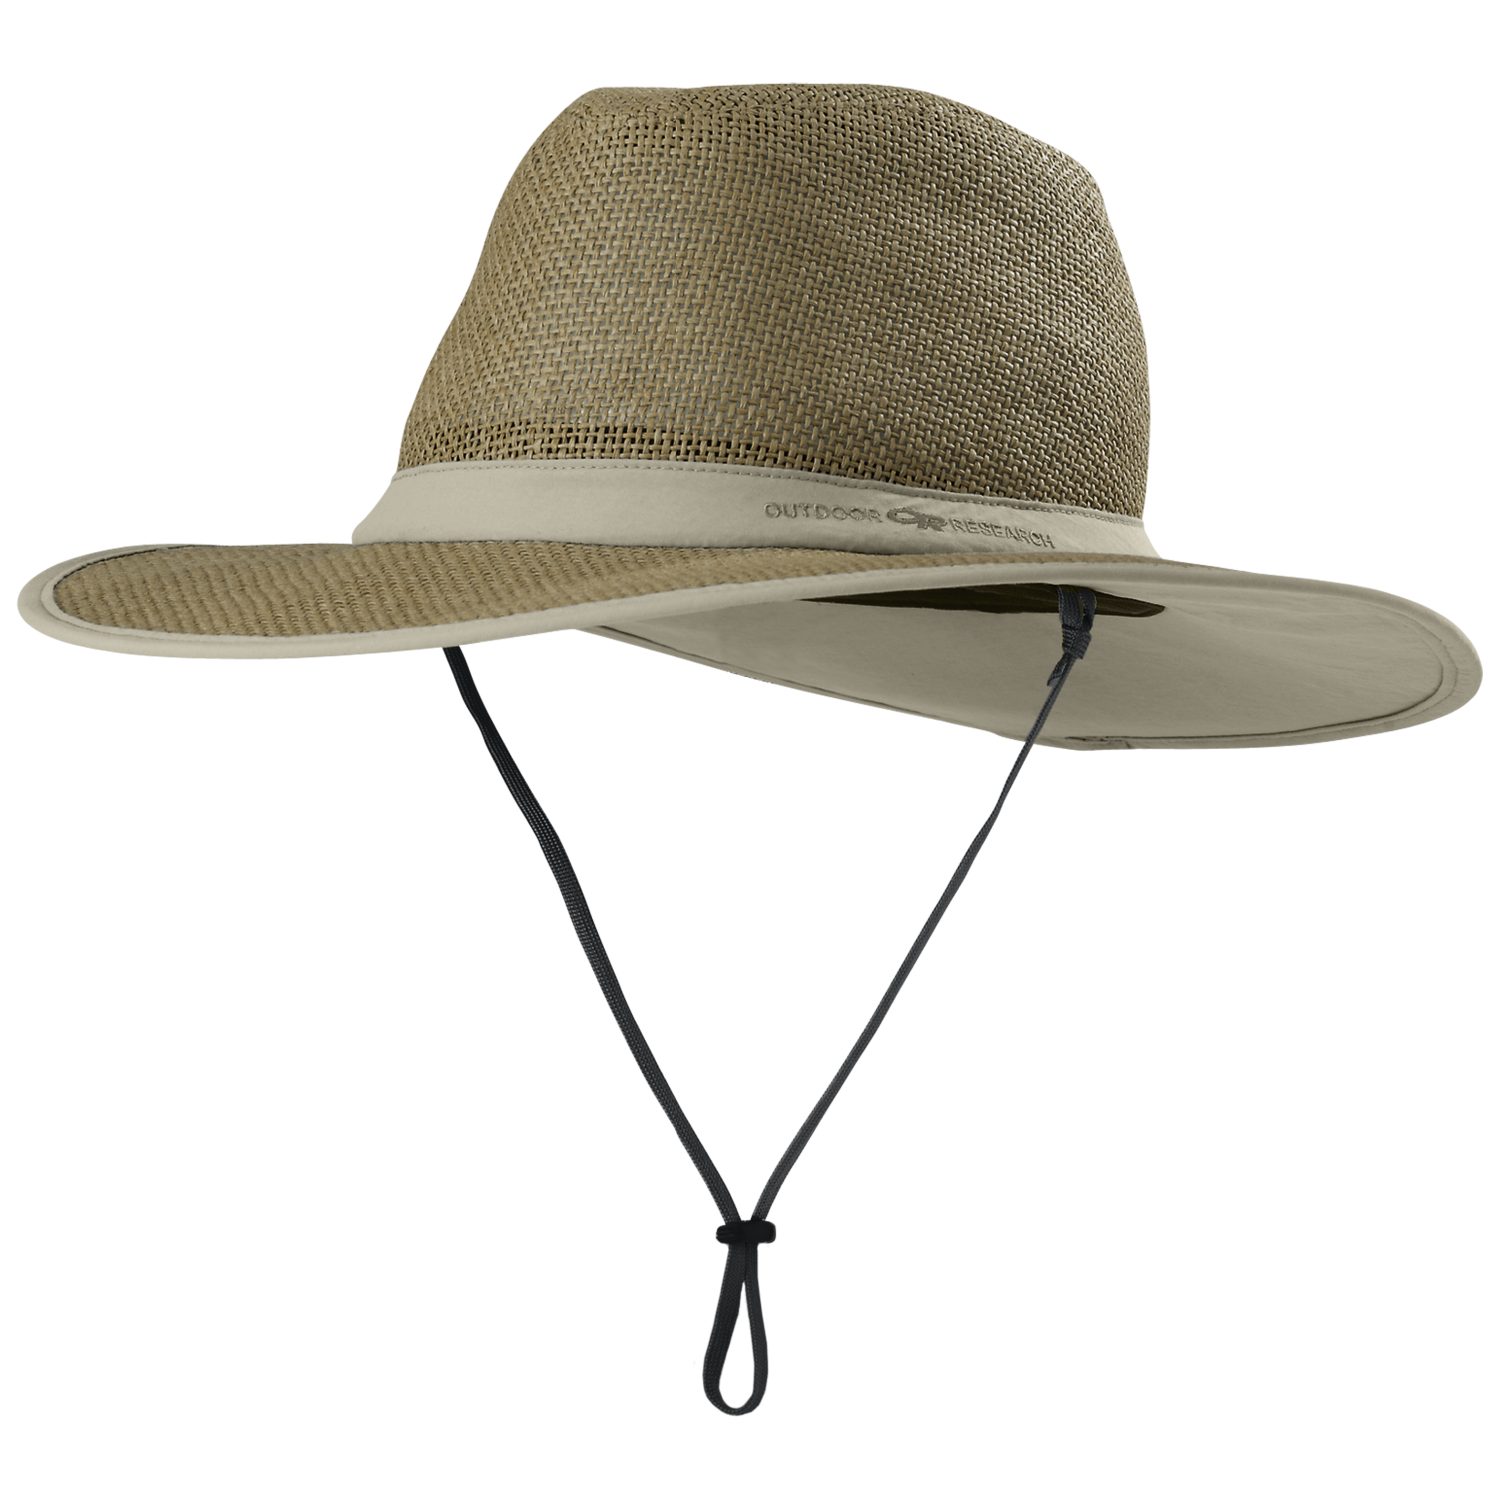 Research Research Hat Papyrus Sun Outdoor Outdoor Brim Outdoorhut